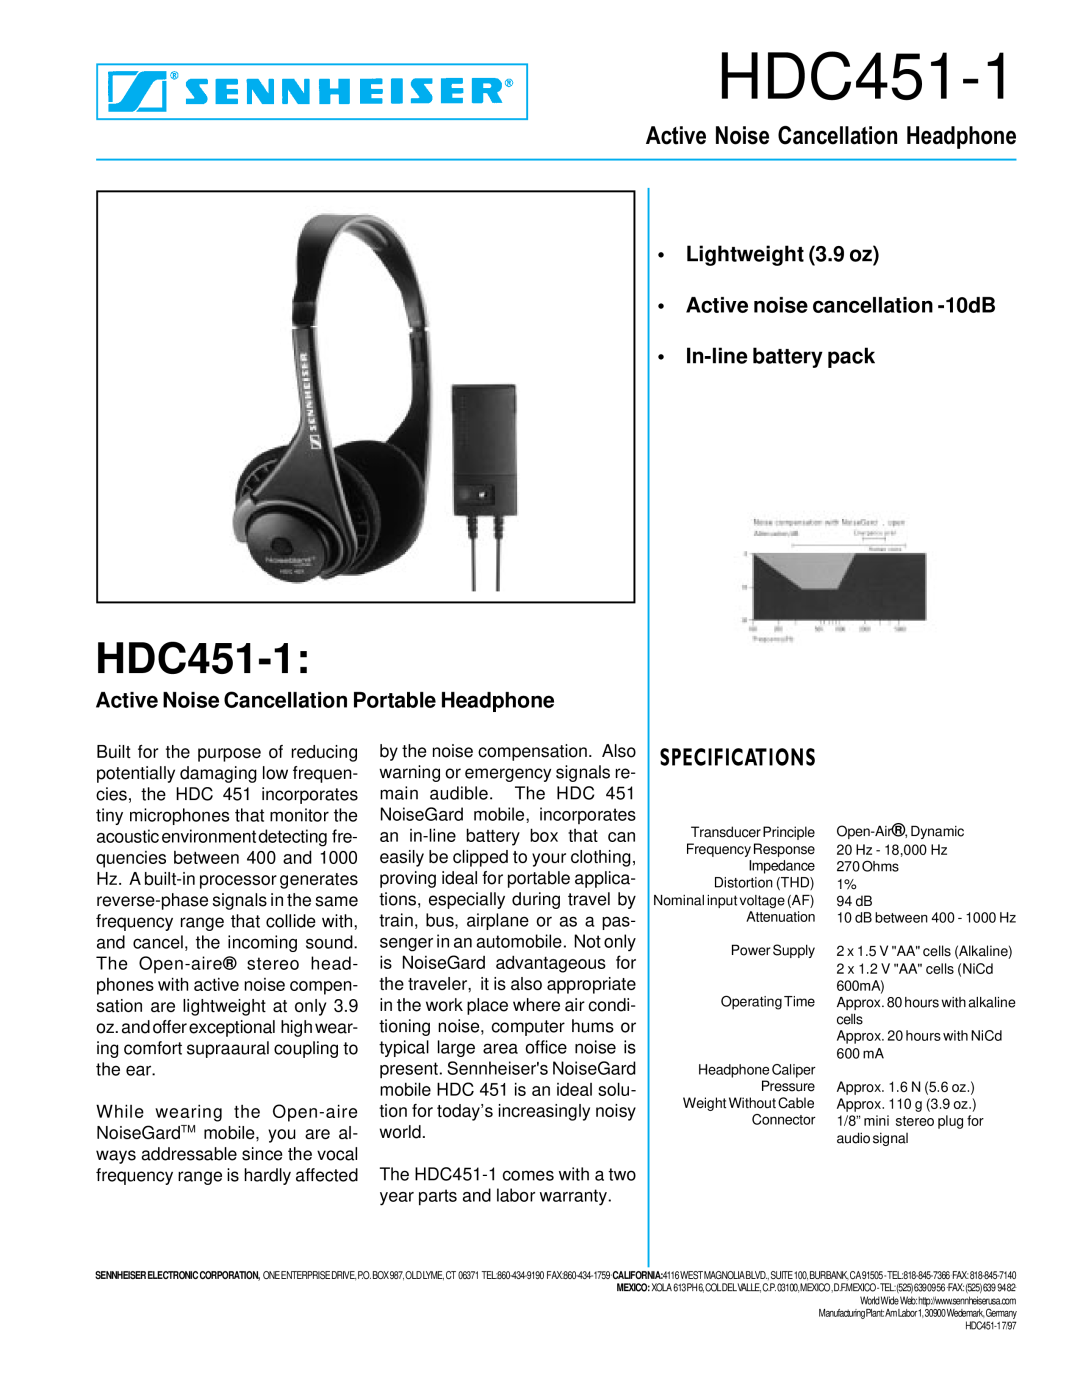 Sennheiser HDC 451-1 specifications HDC451-1, Active Noise Cancellation Headphone, Specifications, Lightweight 3.9 oz 